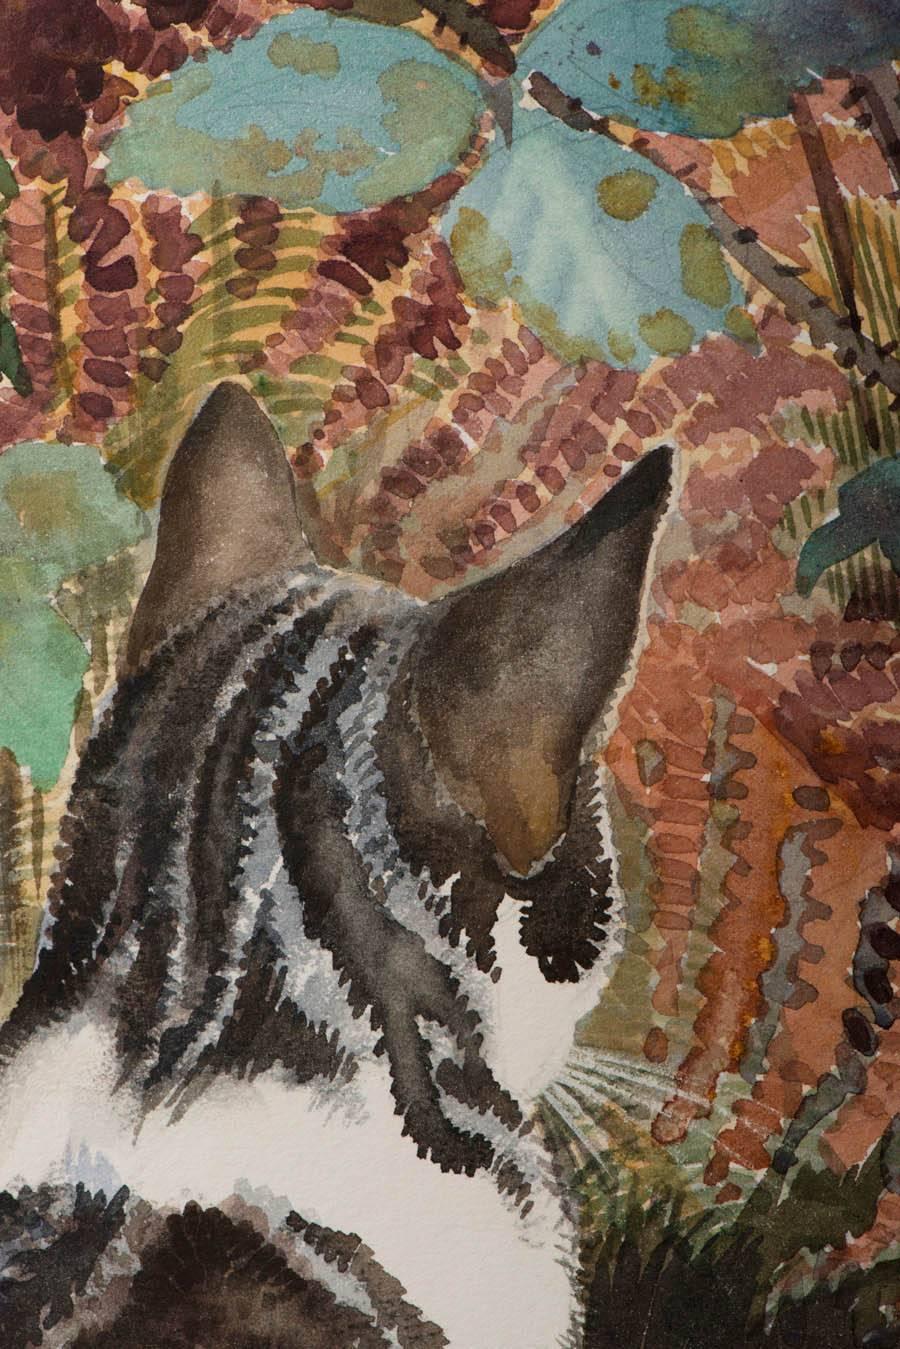 Watercolor Tunnicliffe watercolour painting “Cat among Ferns”, England circa 1970